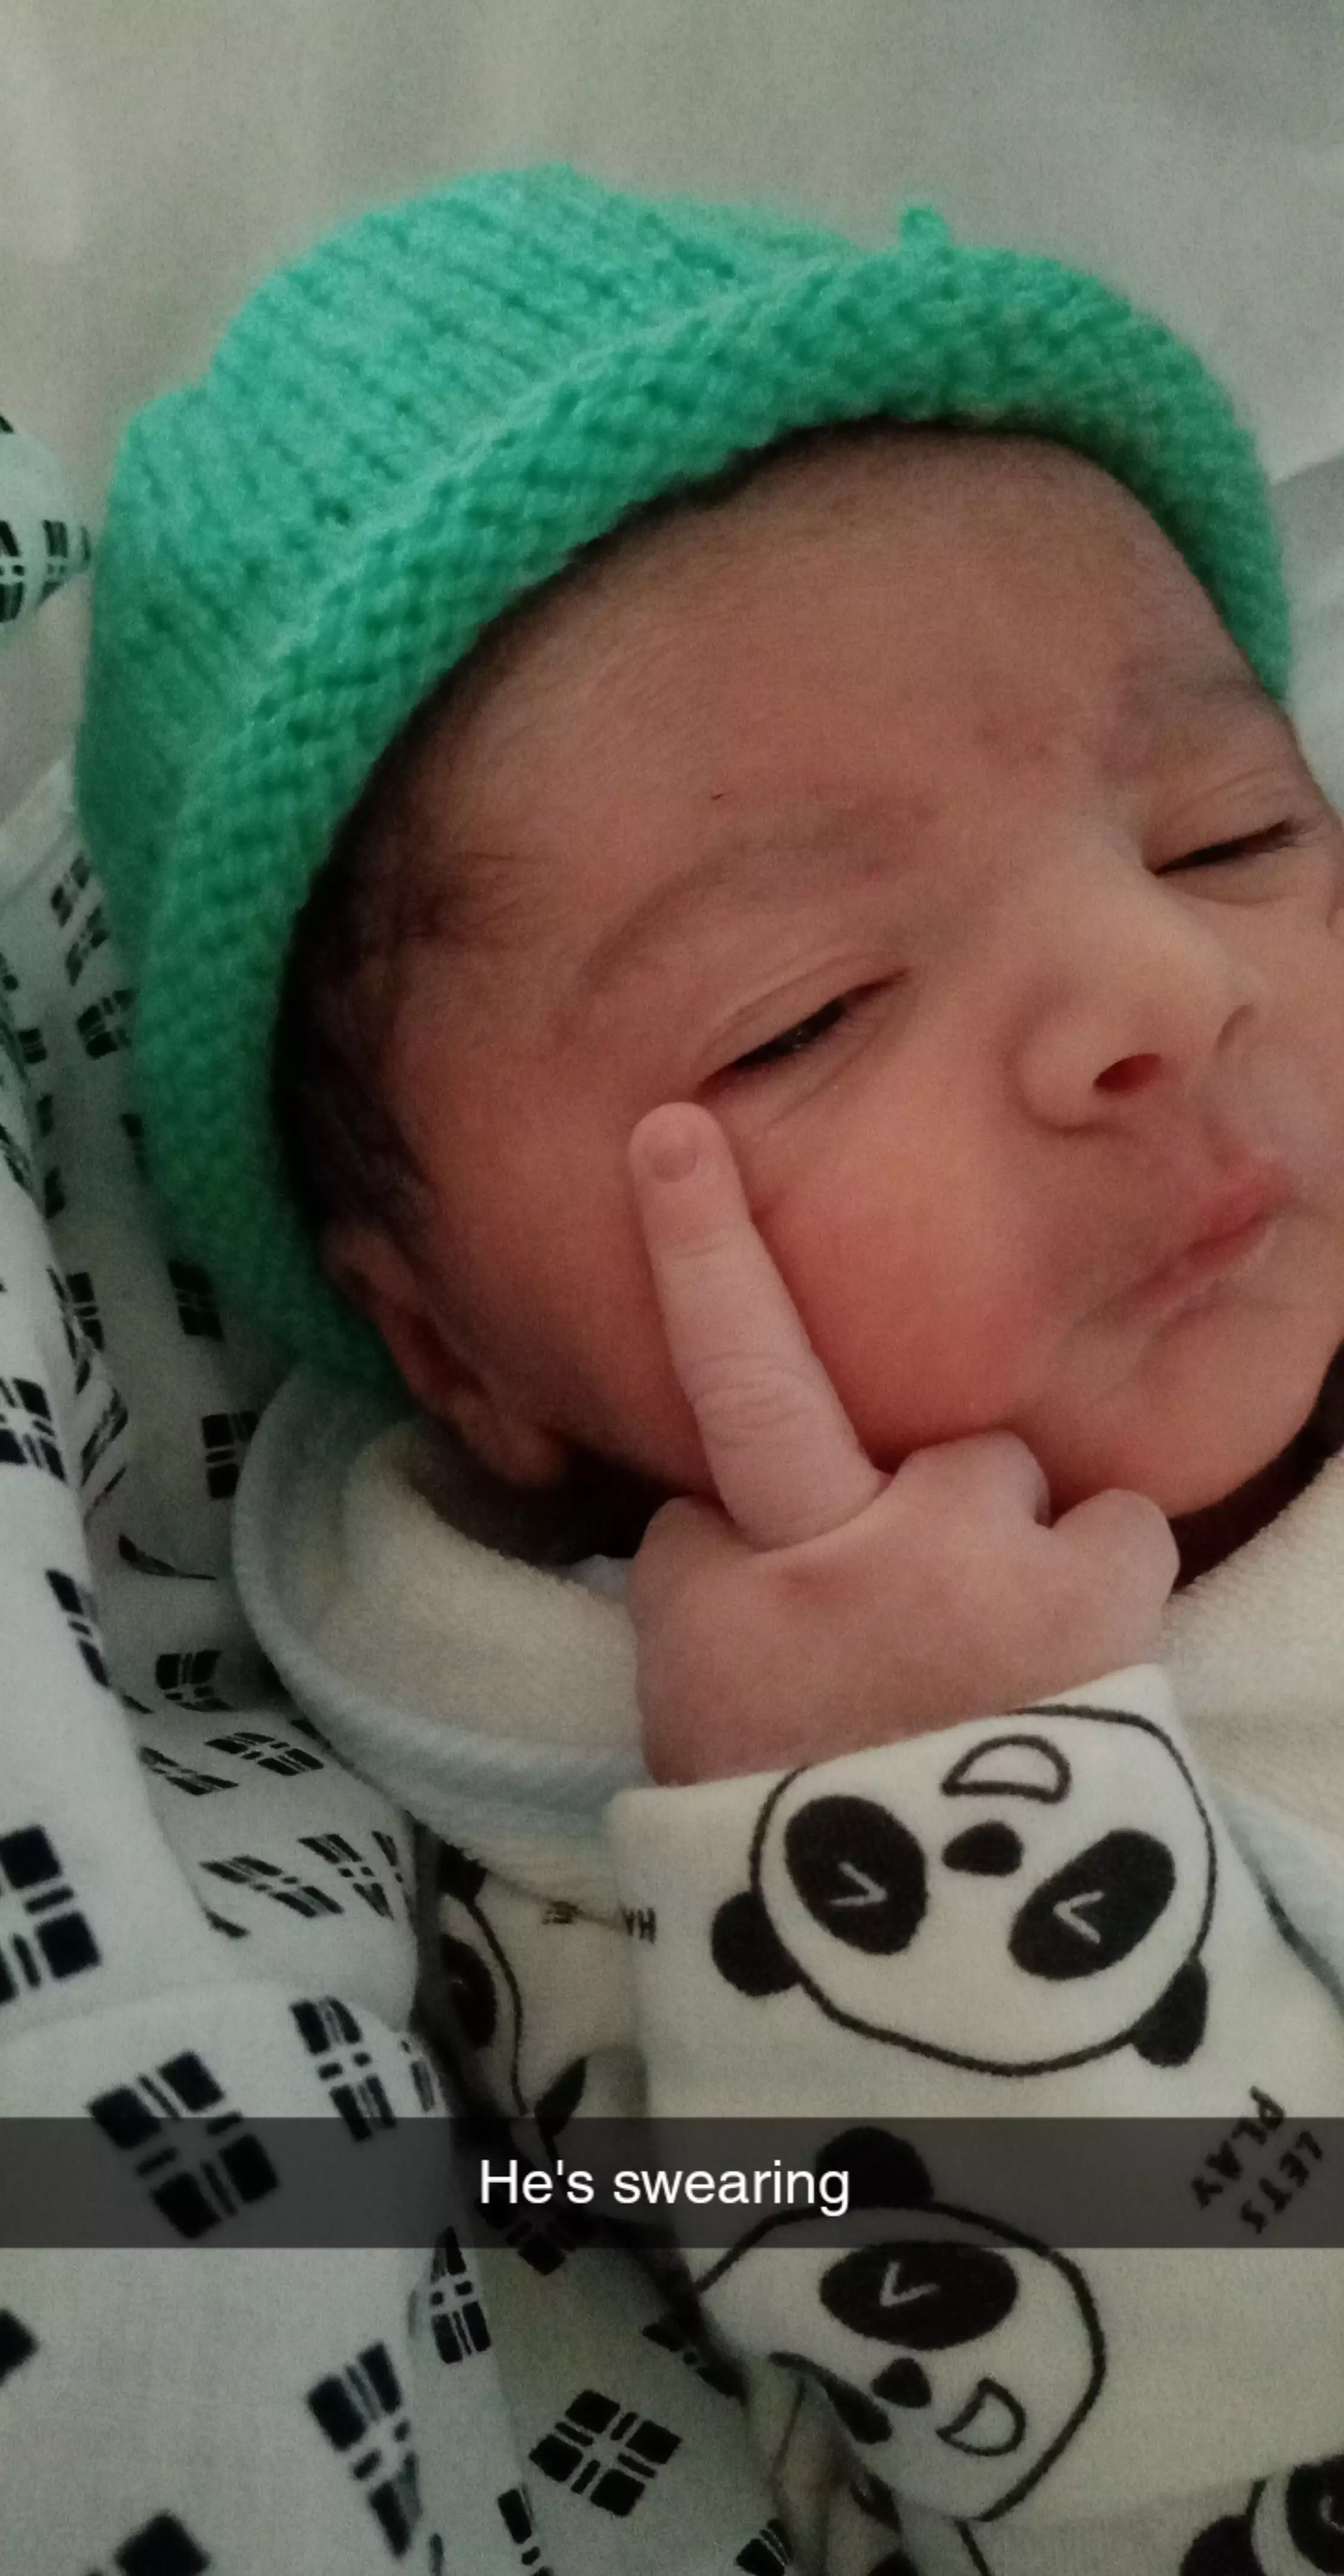 Toyha managed to snap another hilarious photo of her baby putting his middle finger up (